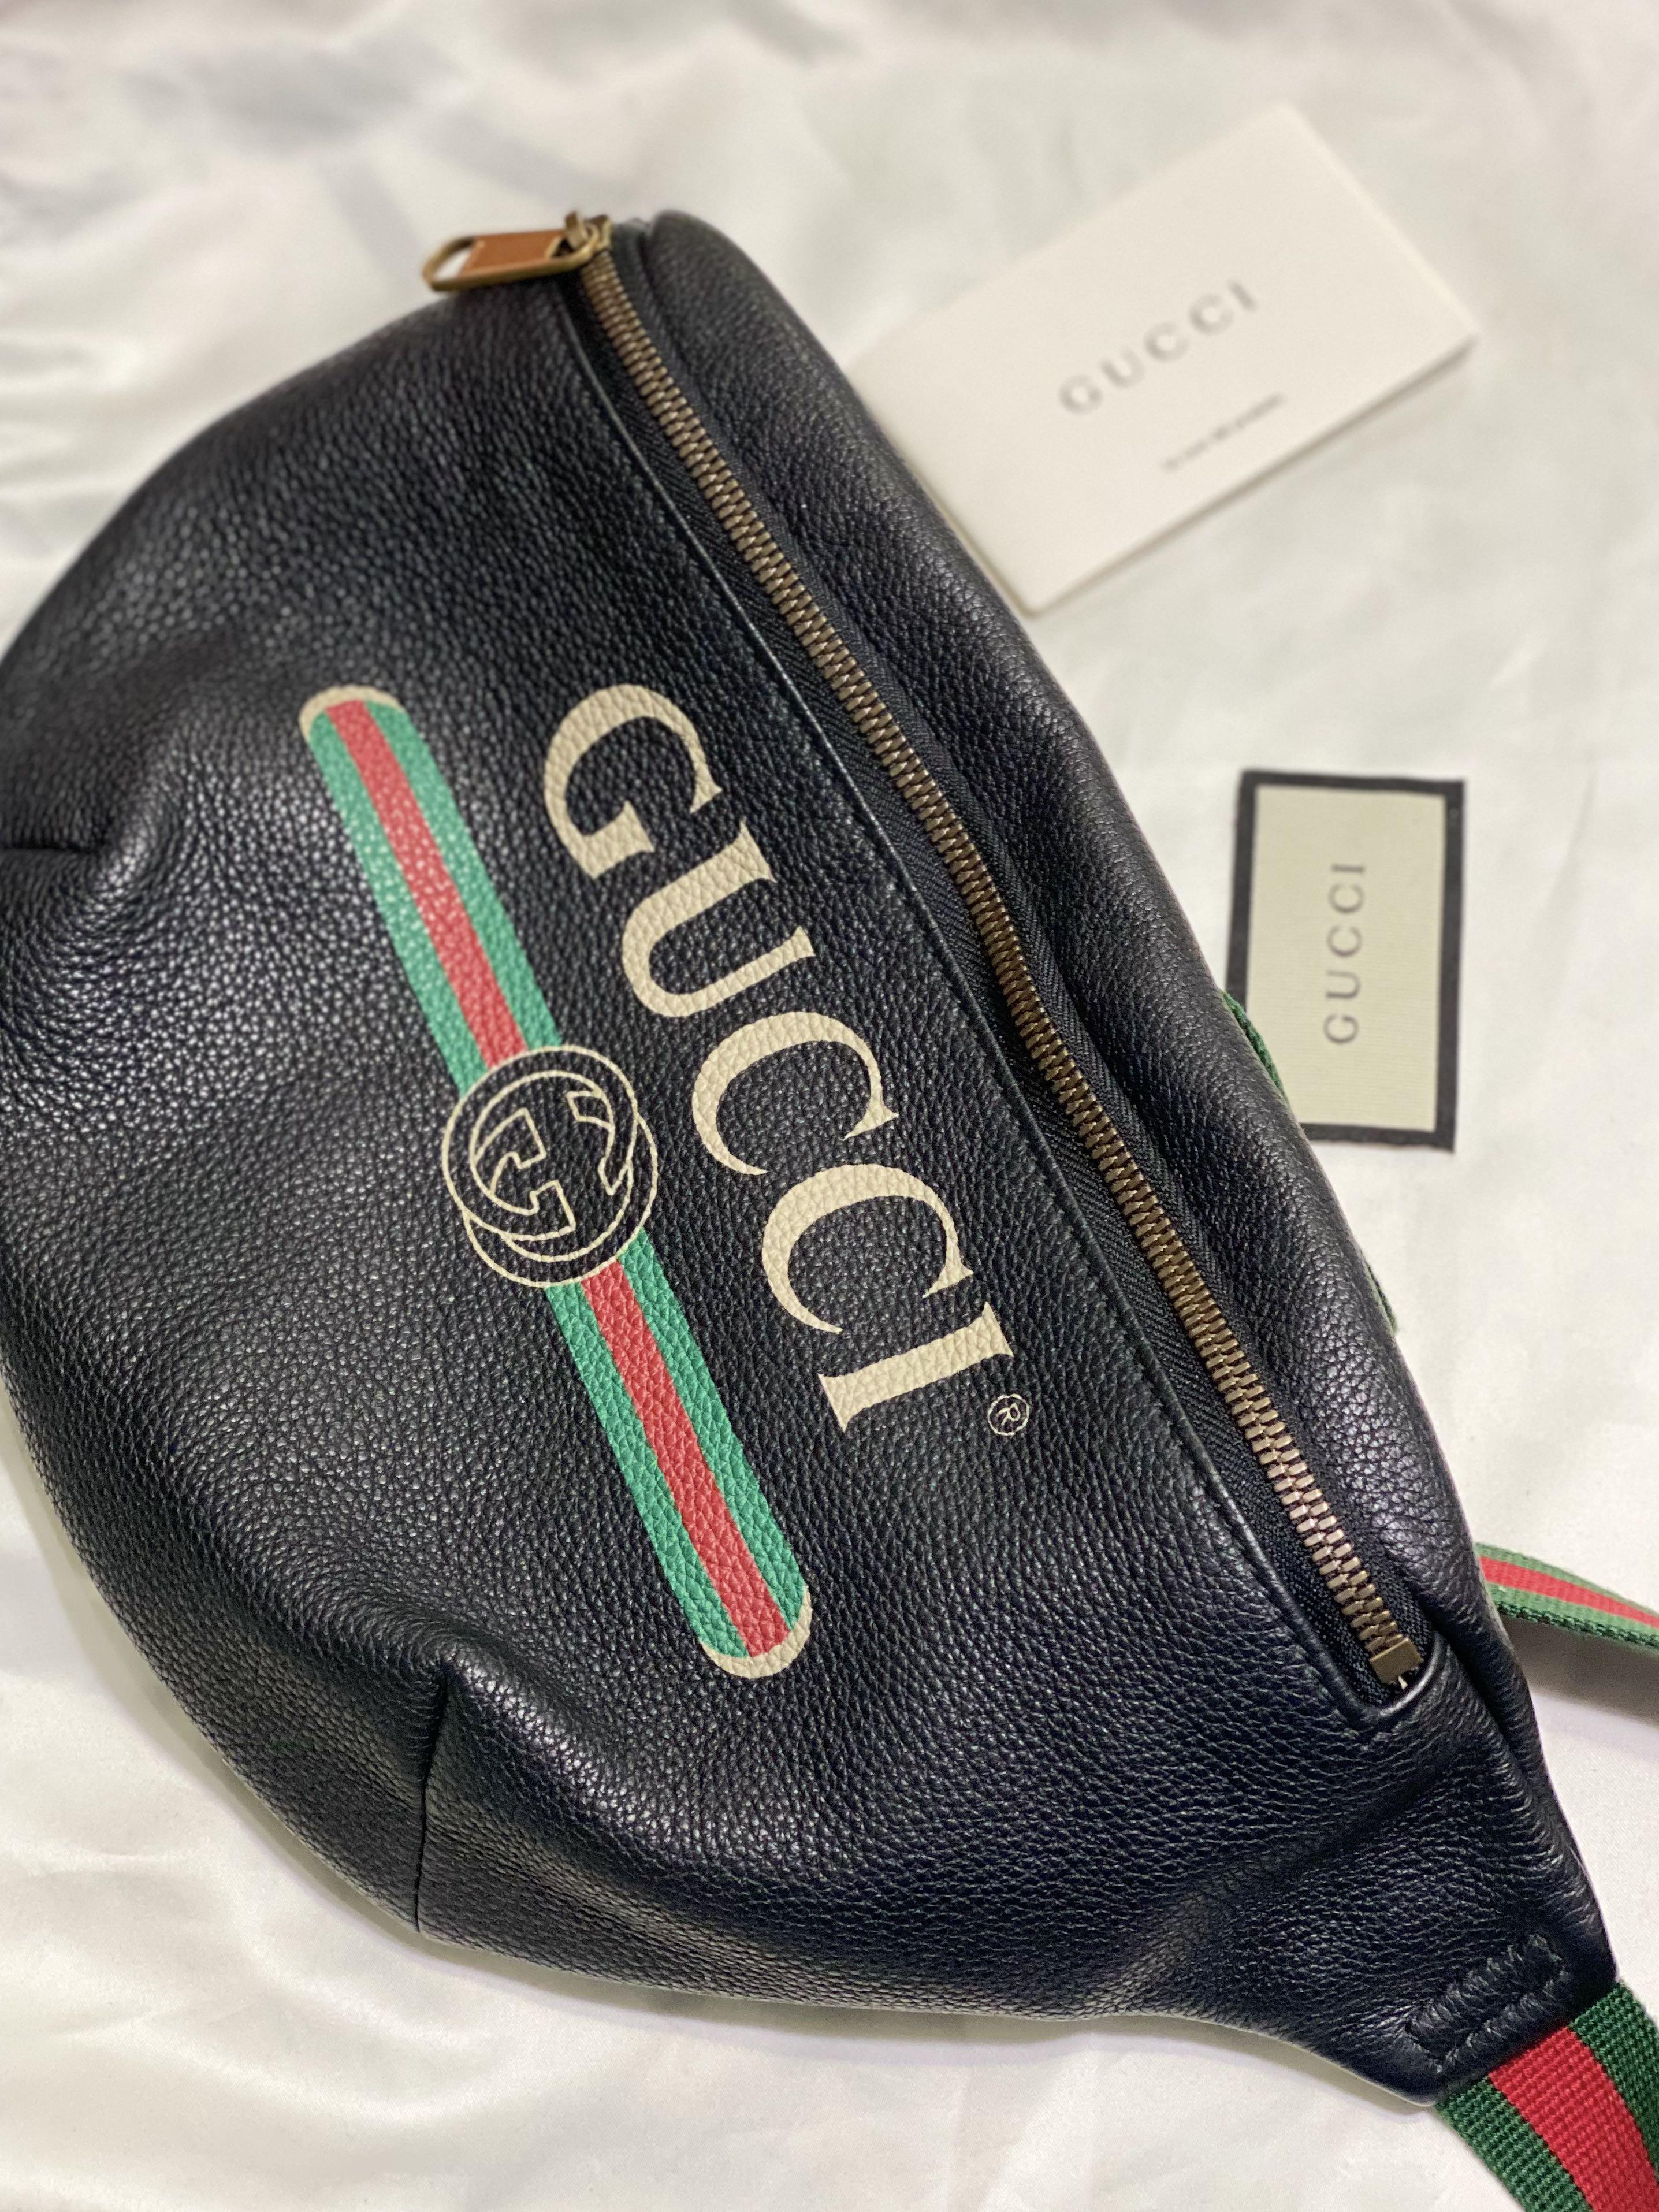 100% Authentic Gucci Leather Belt Bag with Receipts (Big size), Men's ...